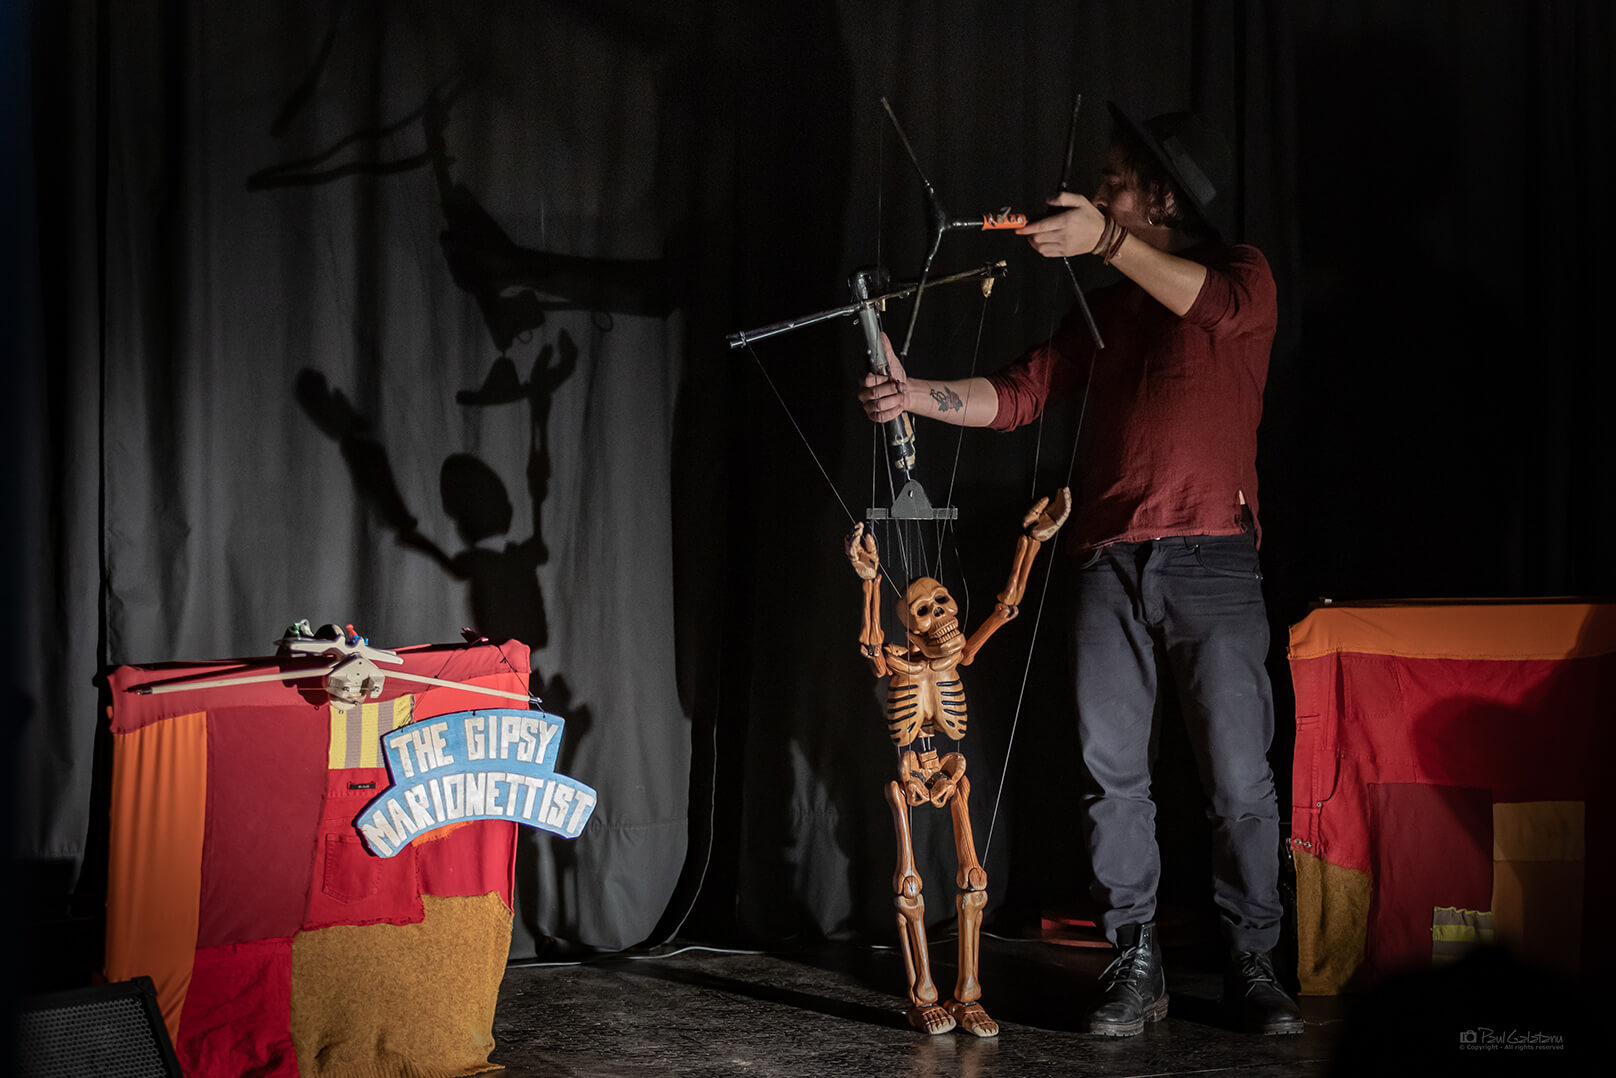 The gipsy marionettist